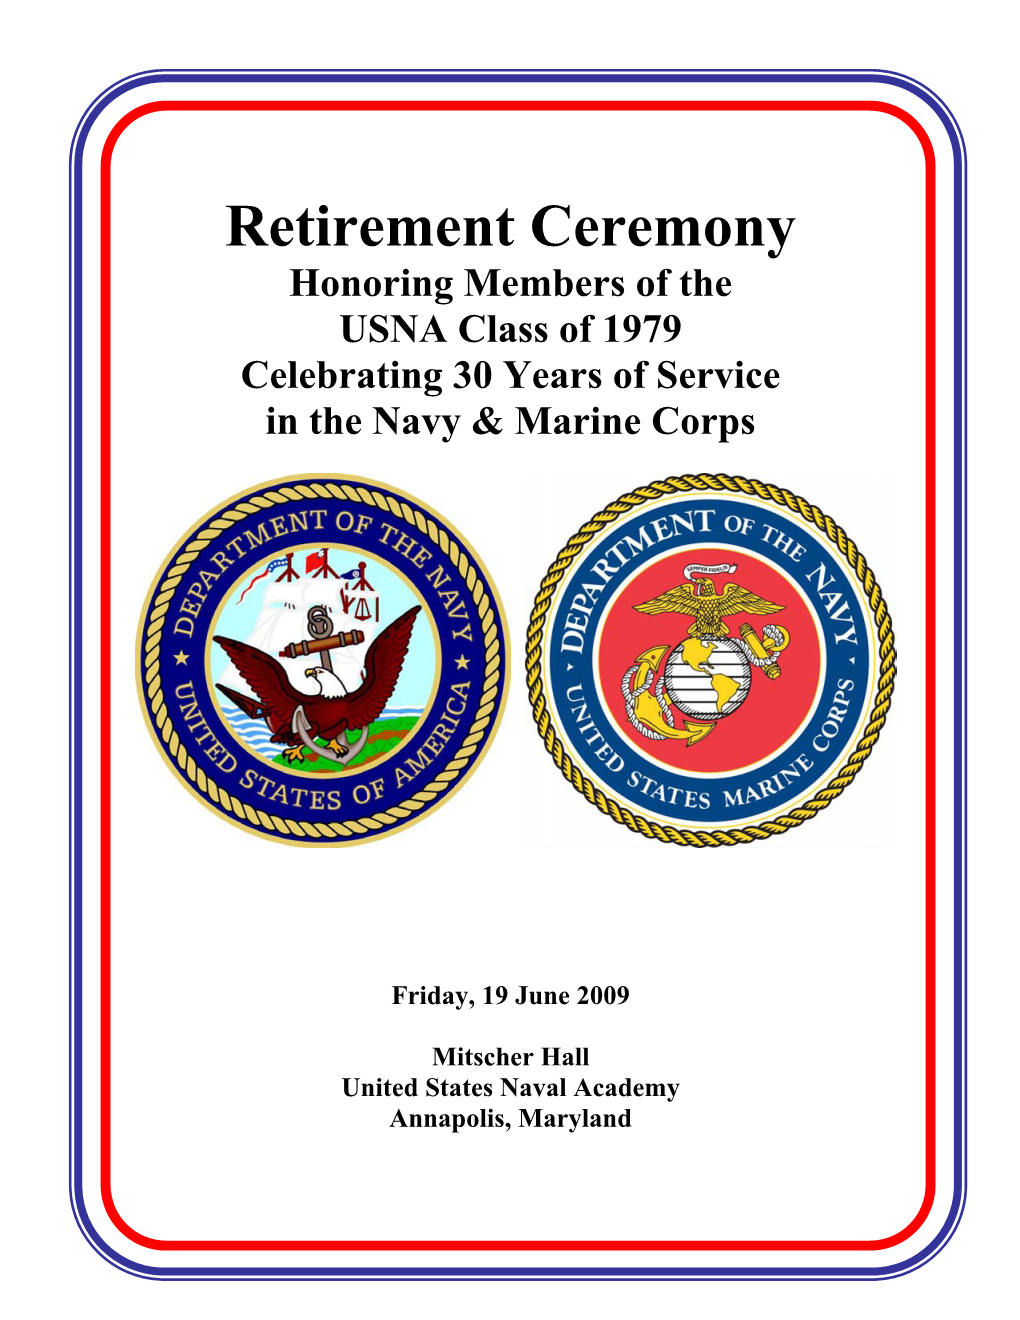 Retirement Ceremony Honoring Members of the USNA Class of 1979 Celebrating 30 Years of Service in the Navy & Marine Corps